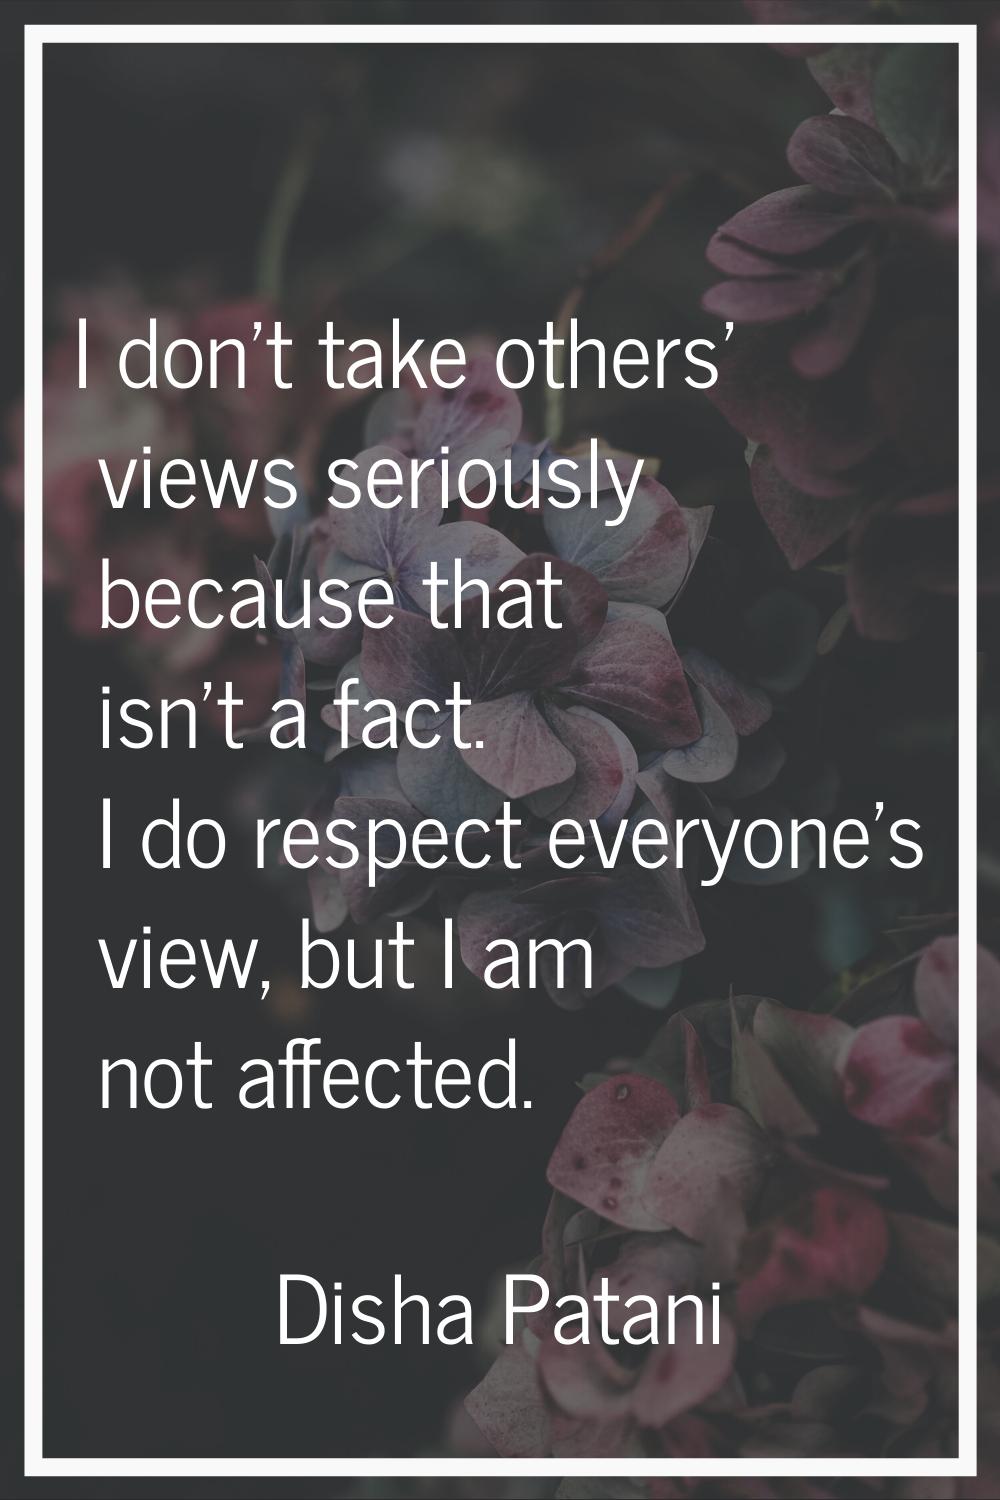 I don't take others' views seriously because that isn't a fact. I do respect everyone's view, but I